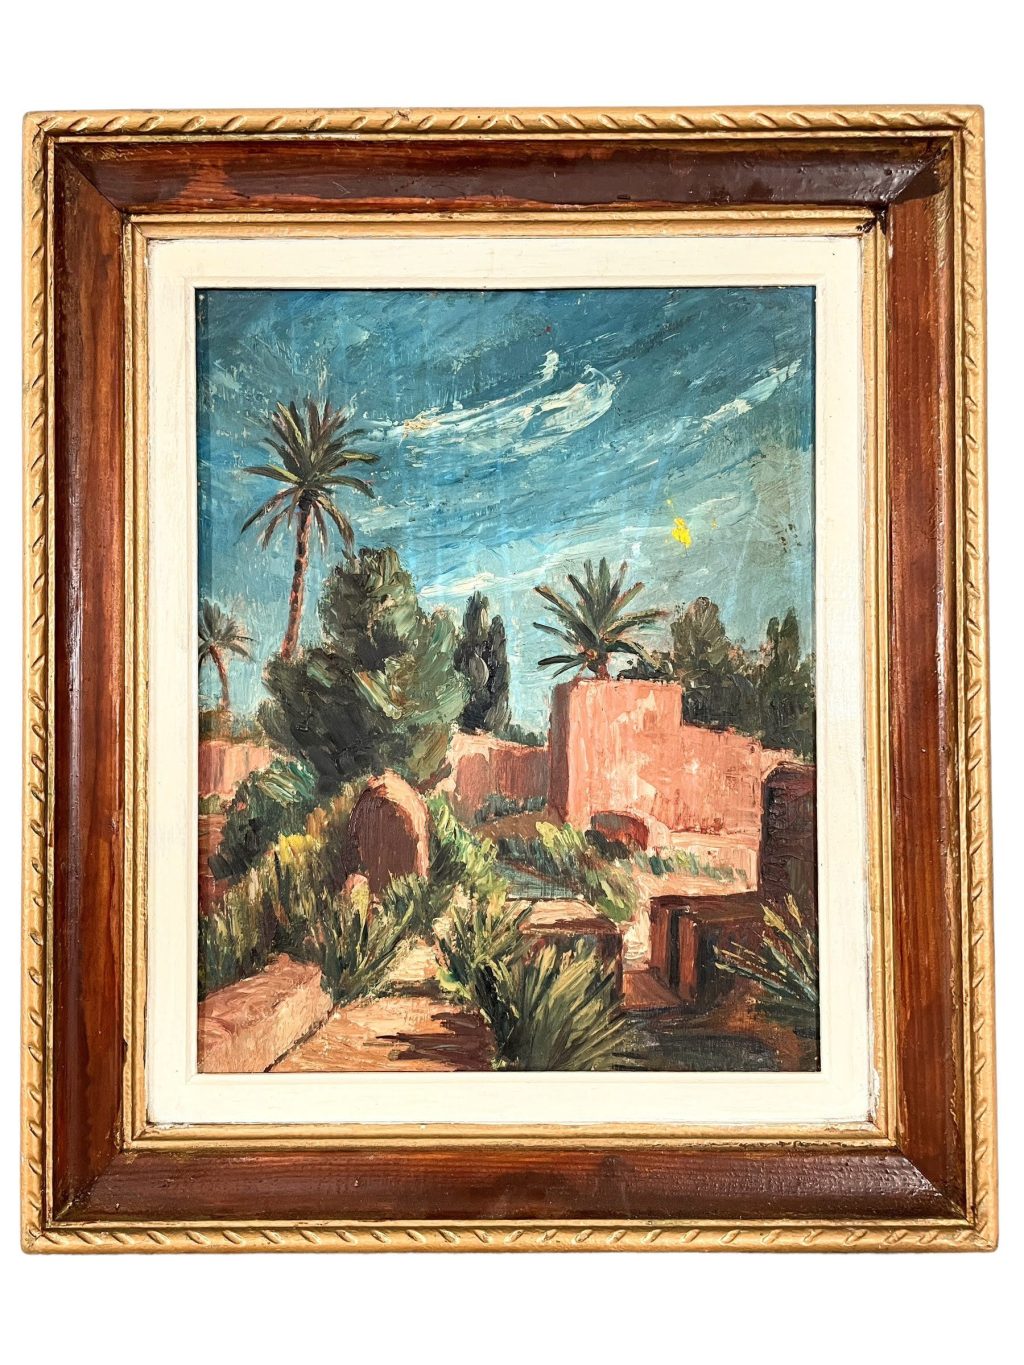 Vintage Moroccan Marrakech Houses Buildings Palm Trees Framed Acrylic Painting Wall Decor circa 1920-1940’s